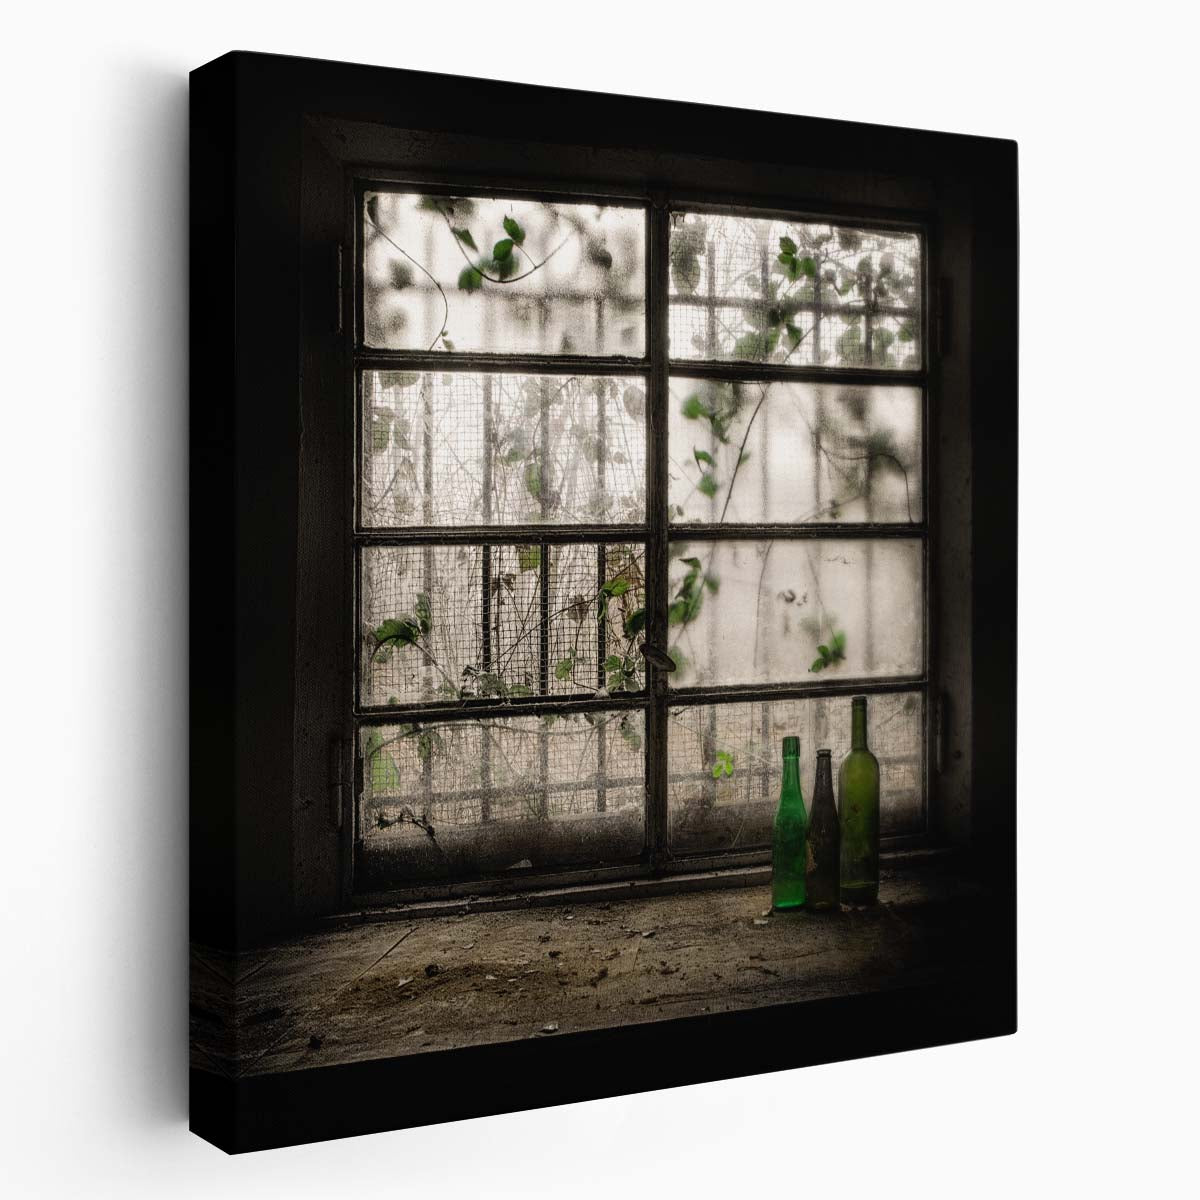 Serene Vintage Italian Window Still Life Photography Wall Art by Luxuriance Designs. Made in USA.